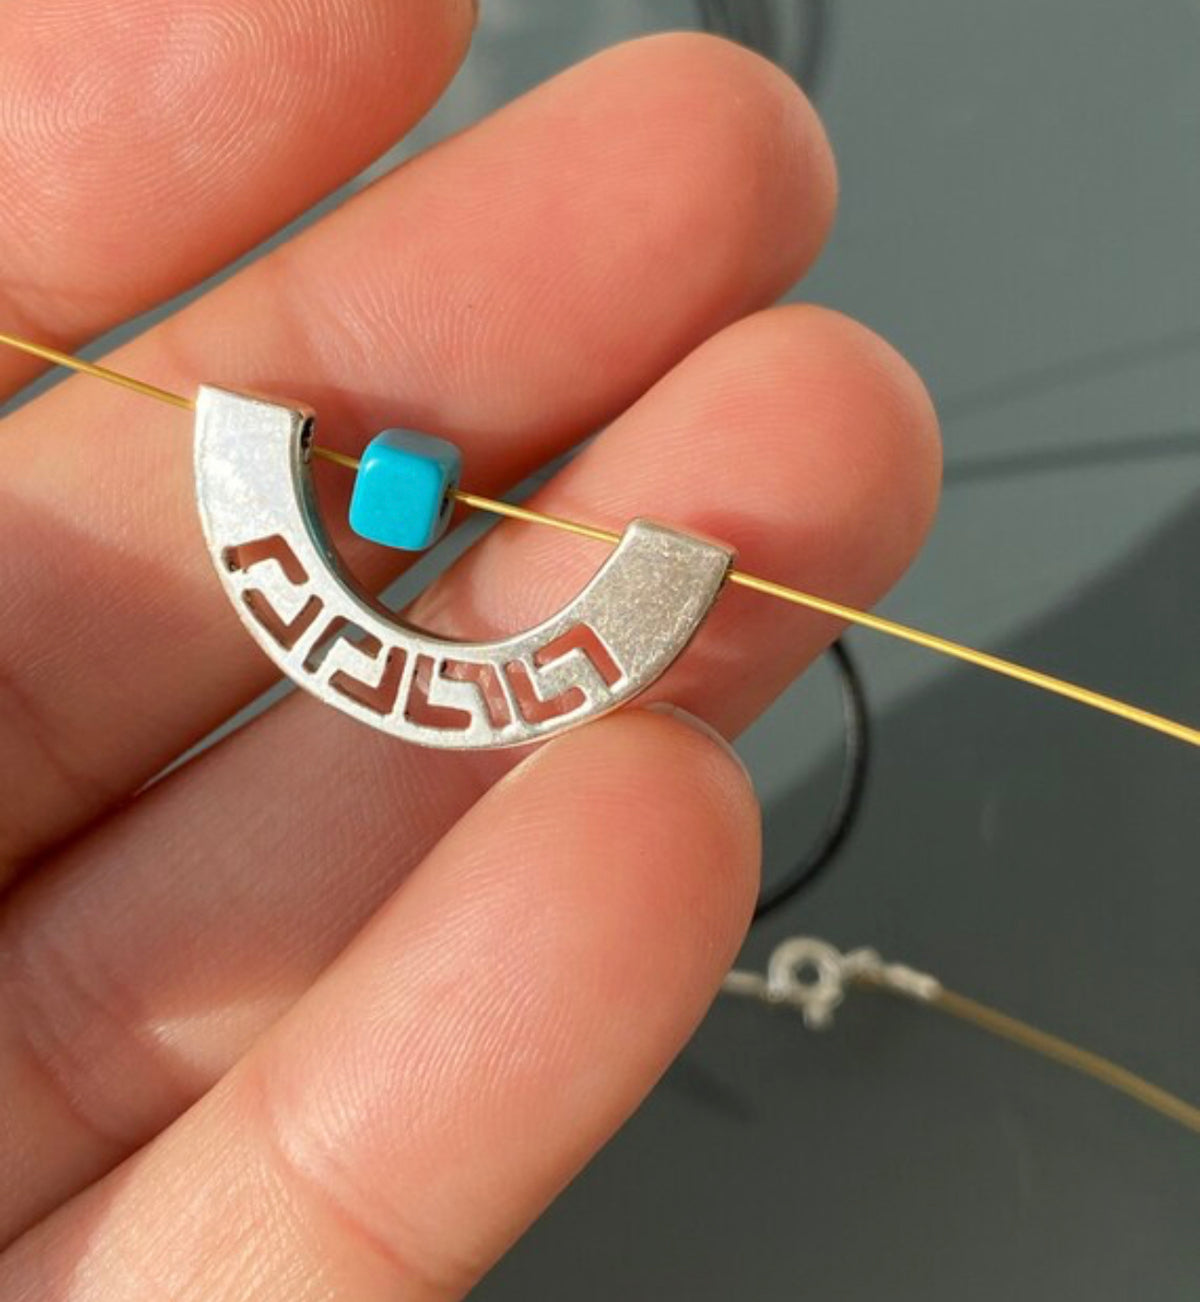 greek key with turquoise and wire necklace